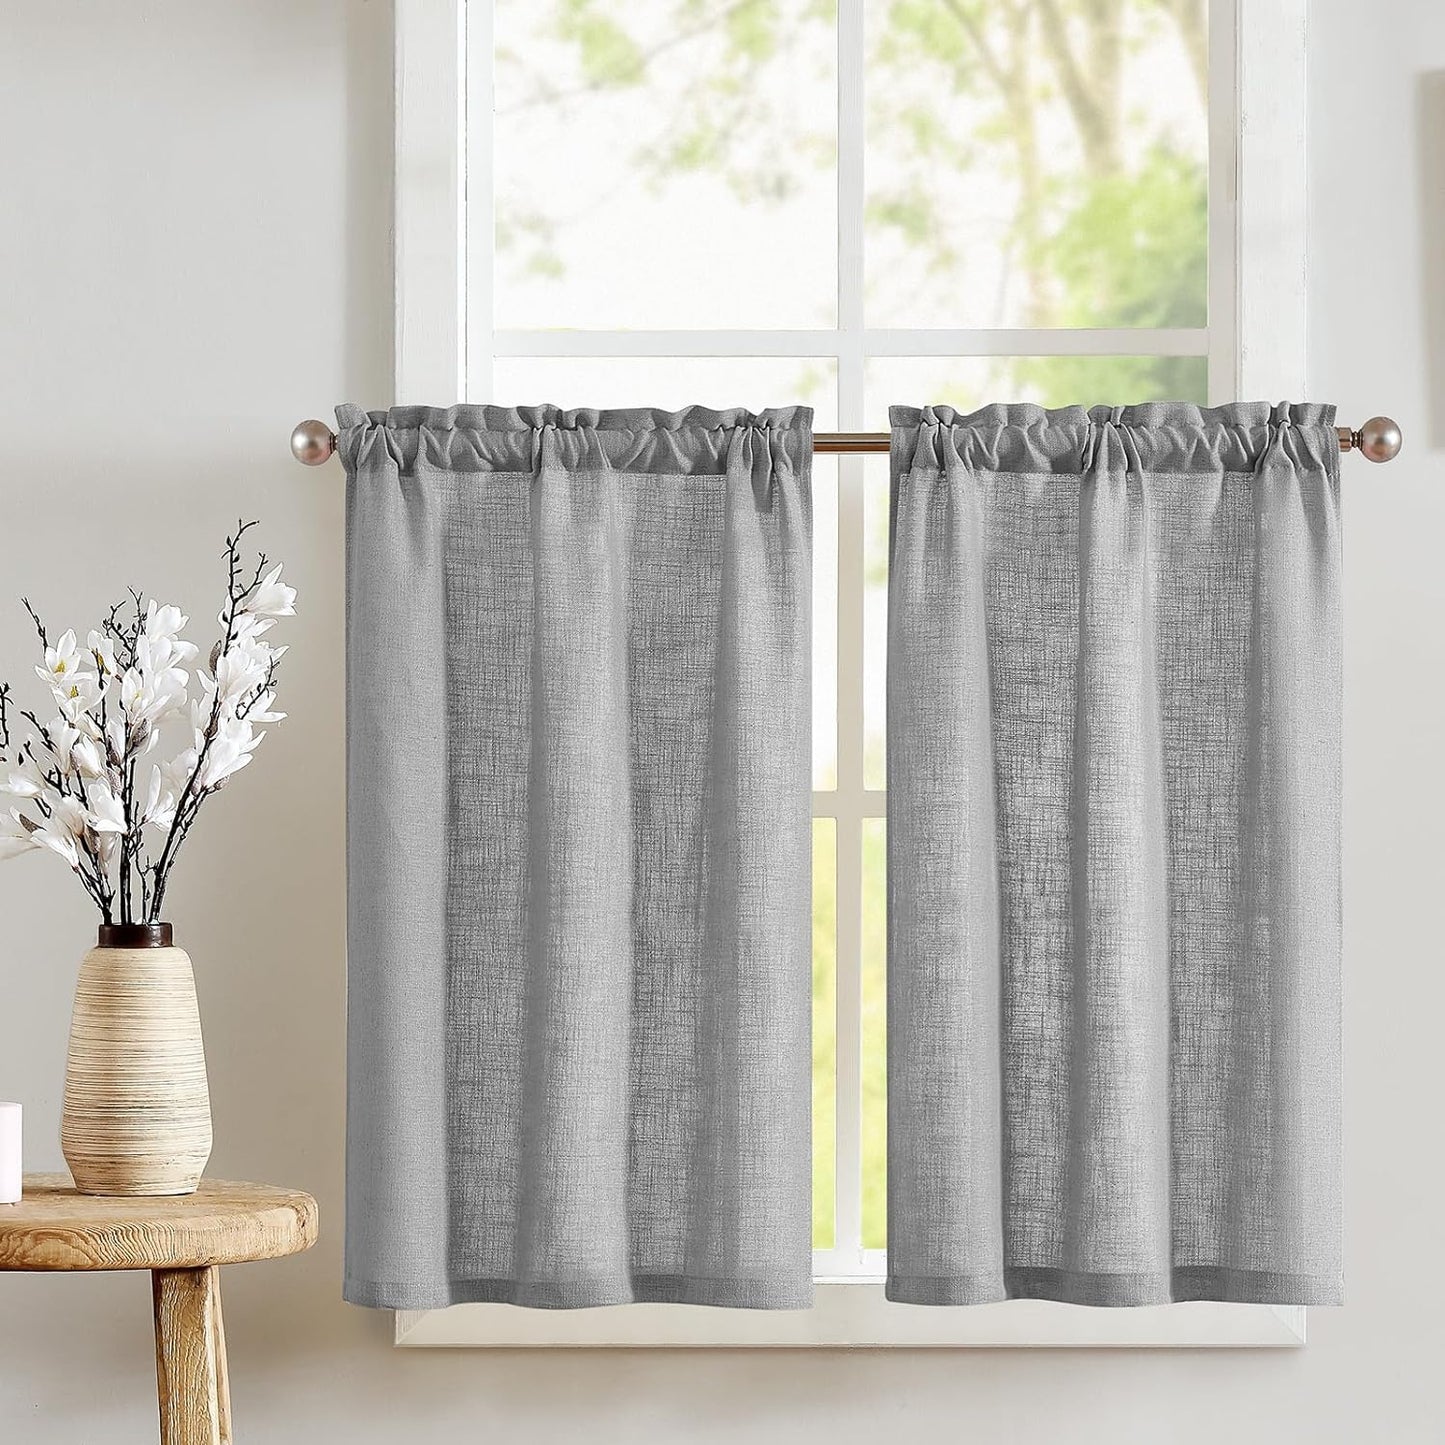 Jinchan Kitchen Curtains Striped Tier Curtains Ticking Stripe Linen Curtains Pinstripe Cafe Curtains 24 Inch Length for Living Room Bathroom Farmhouse Curtains Rod Pocket 2 Panels Black on Beige  CKNY HOME FASHION Thick Linen Grey W26 X L24 